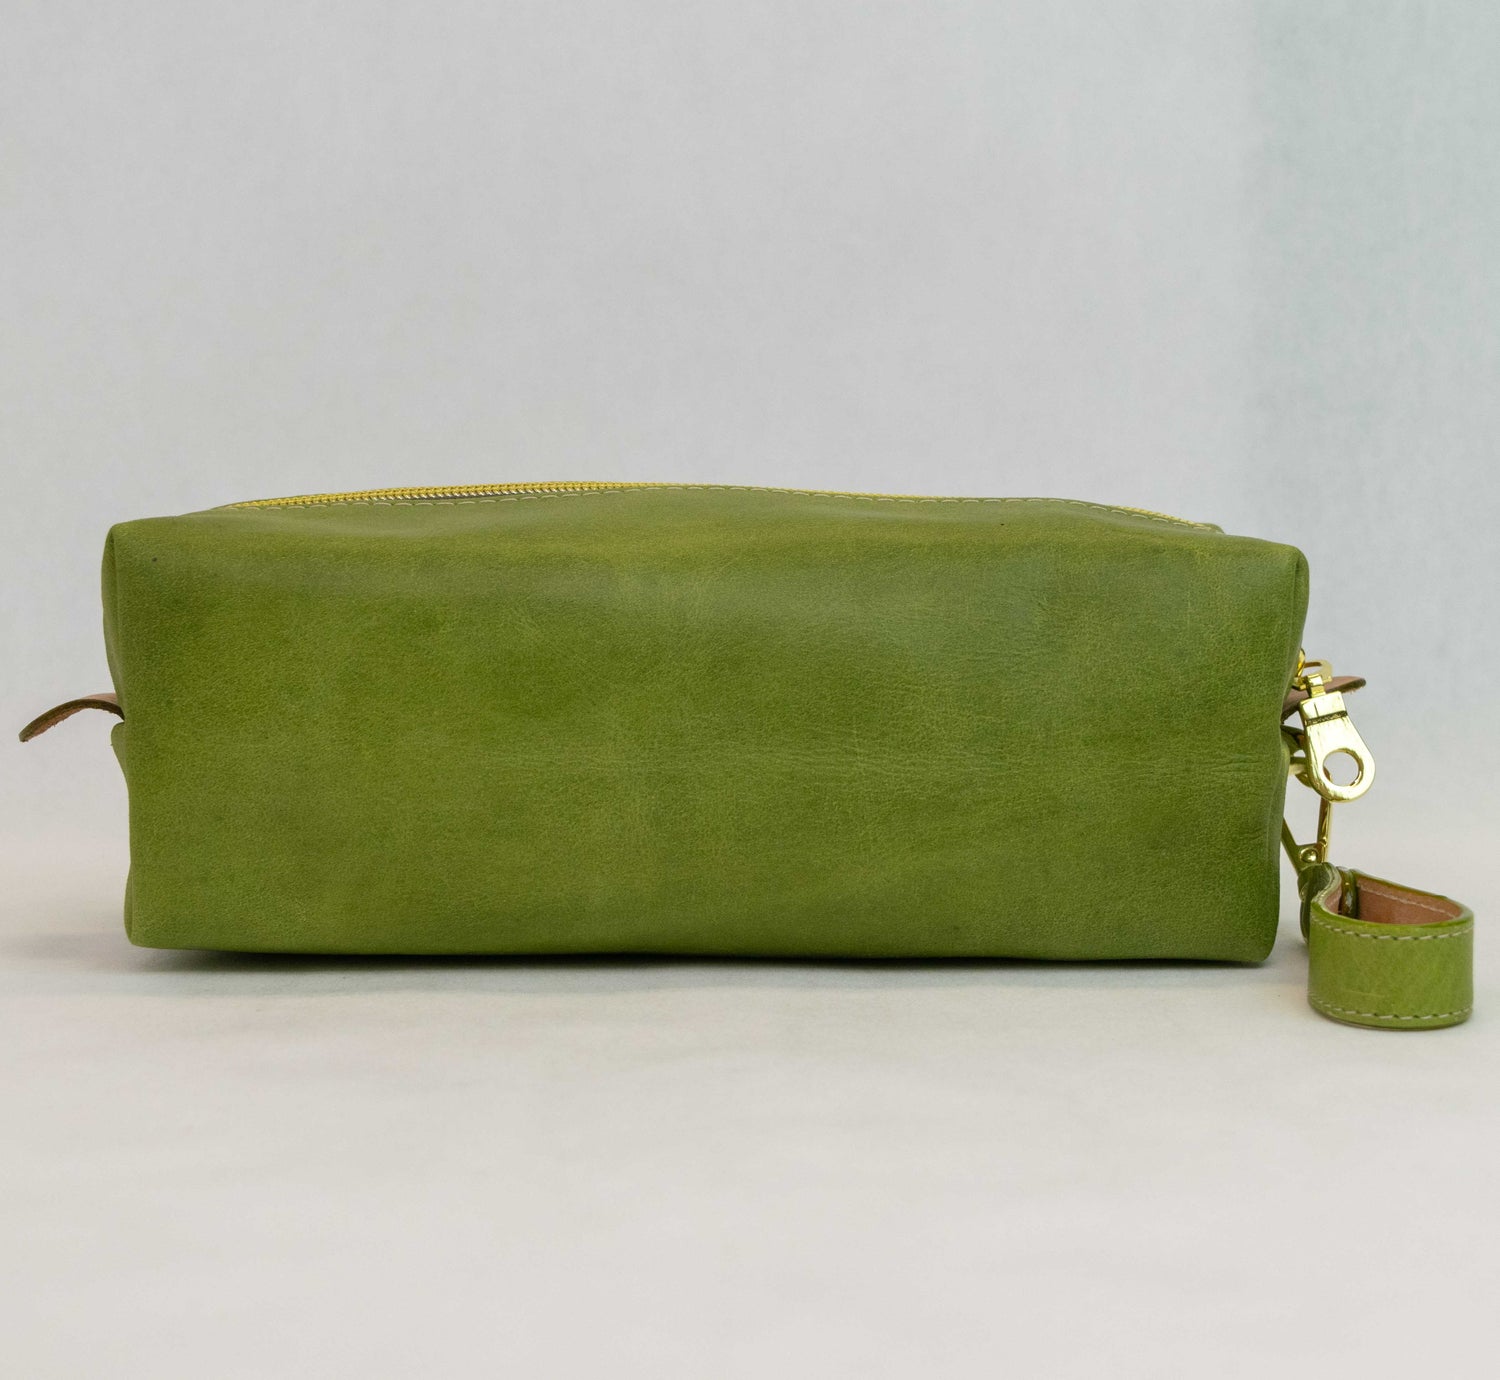 Back view of T5 bath dopp kit toiletry wash bag designer handcrafted of smooth calf leather in vintage aloe green.